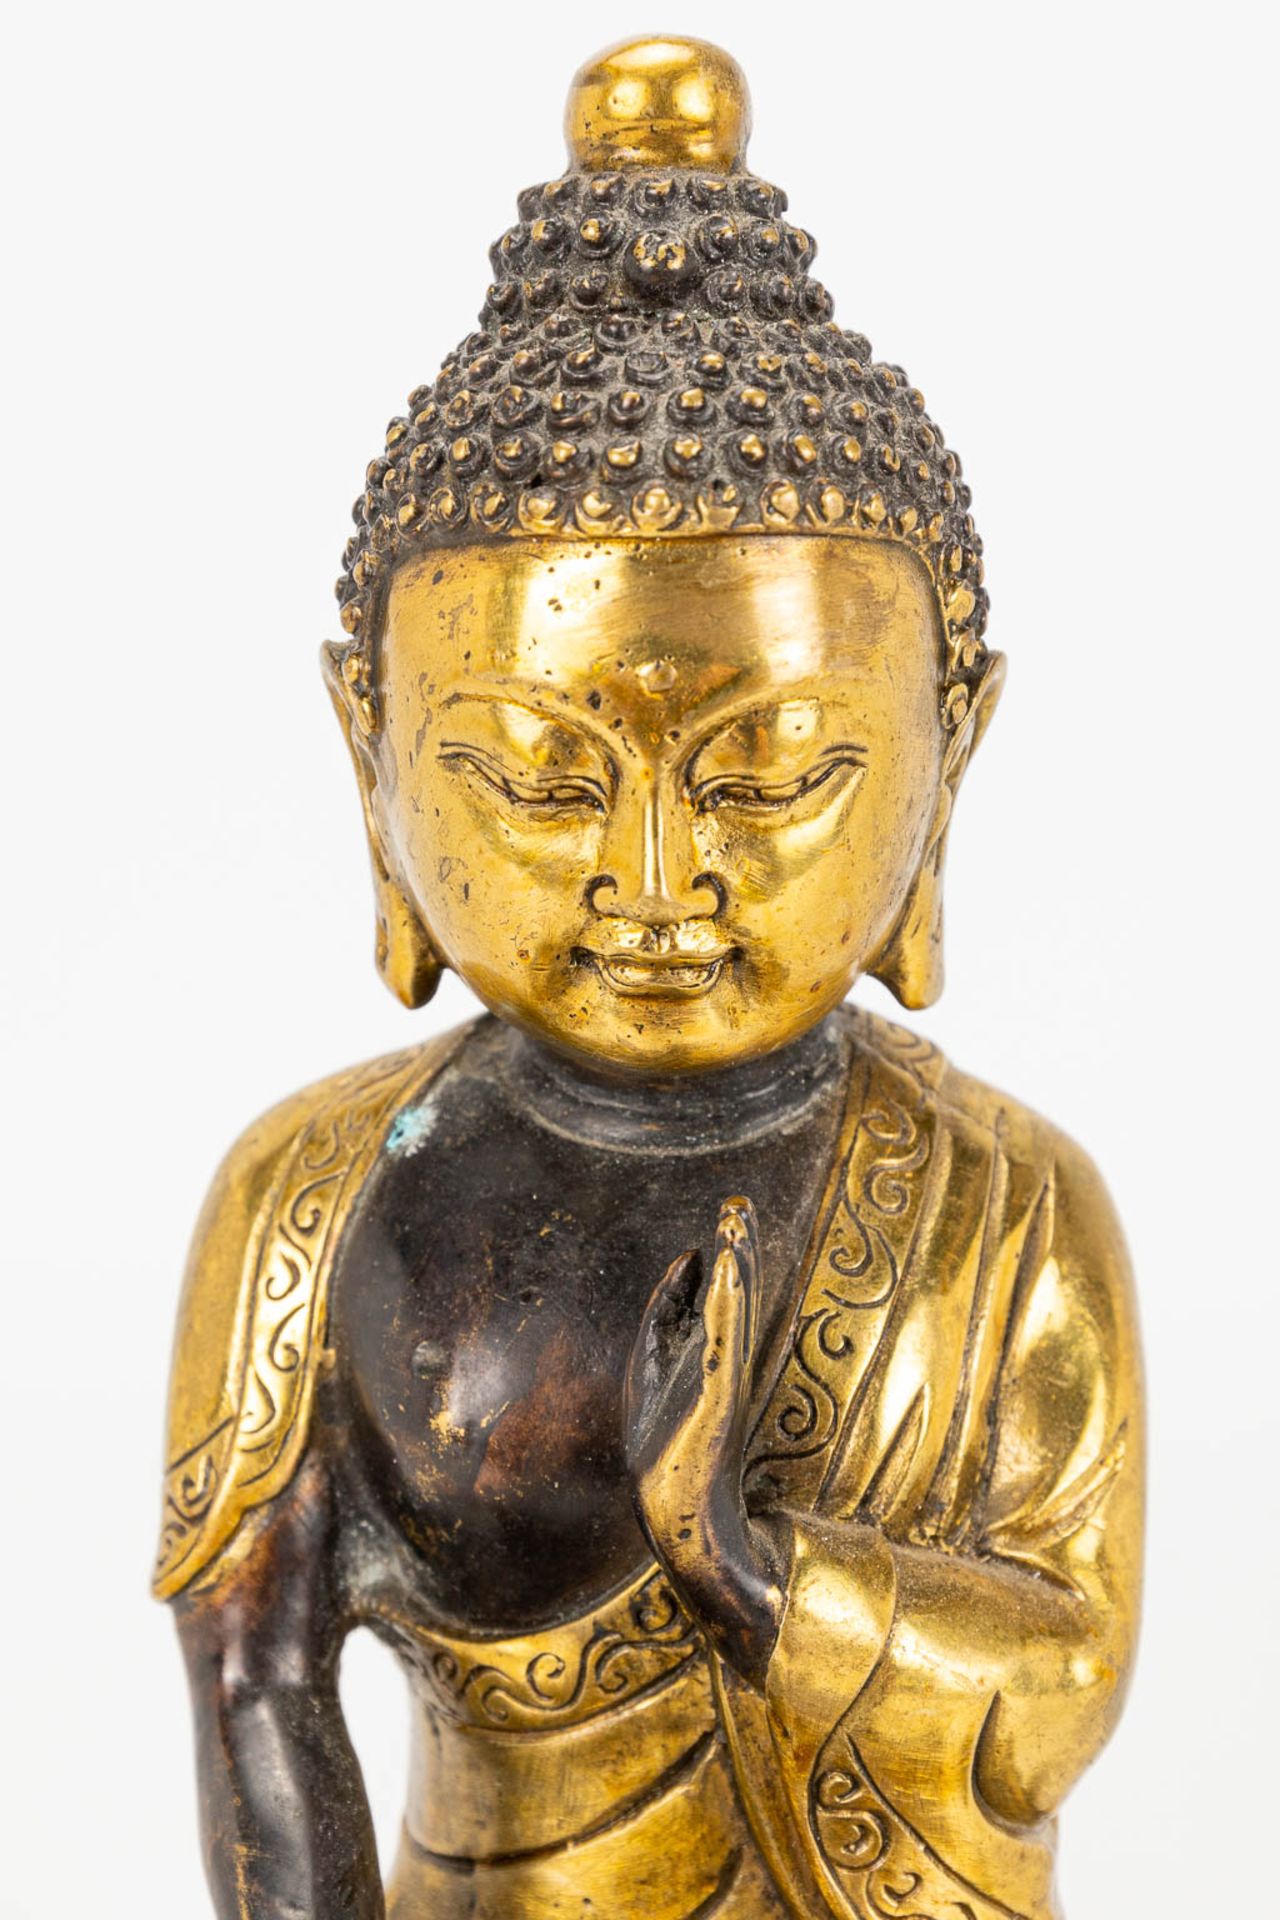 A Buddha on a lotus flower made of bronze. - Image 10 of 11